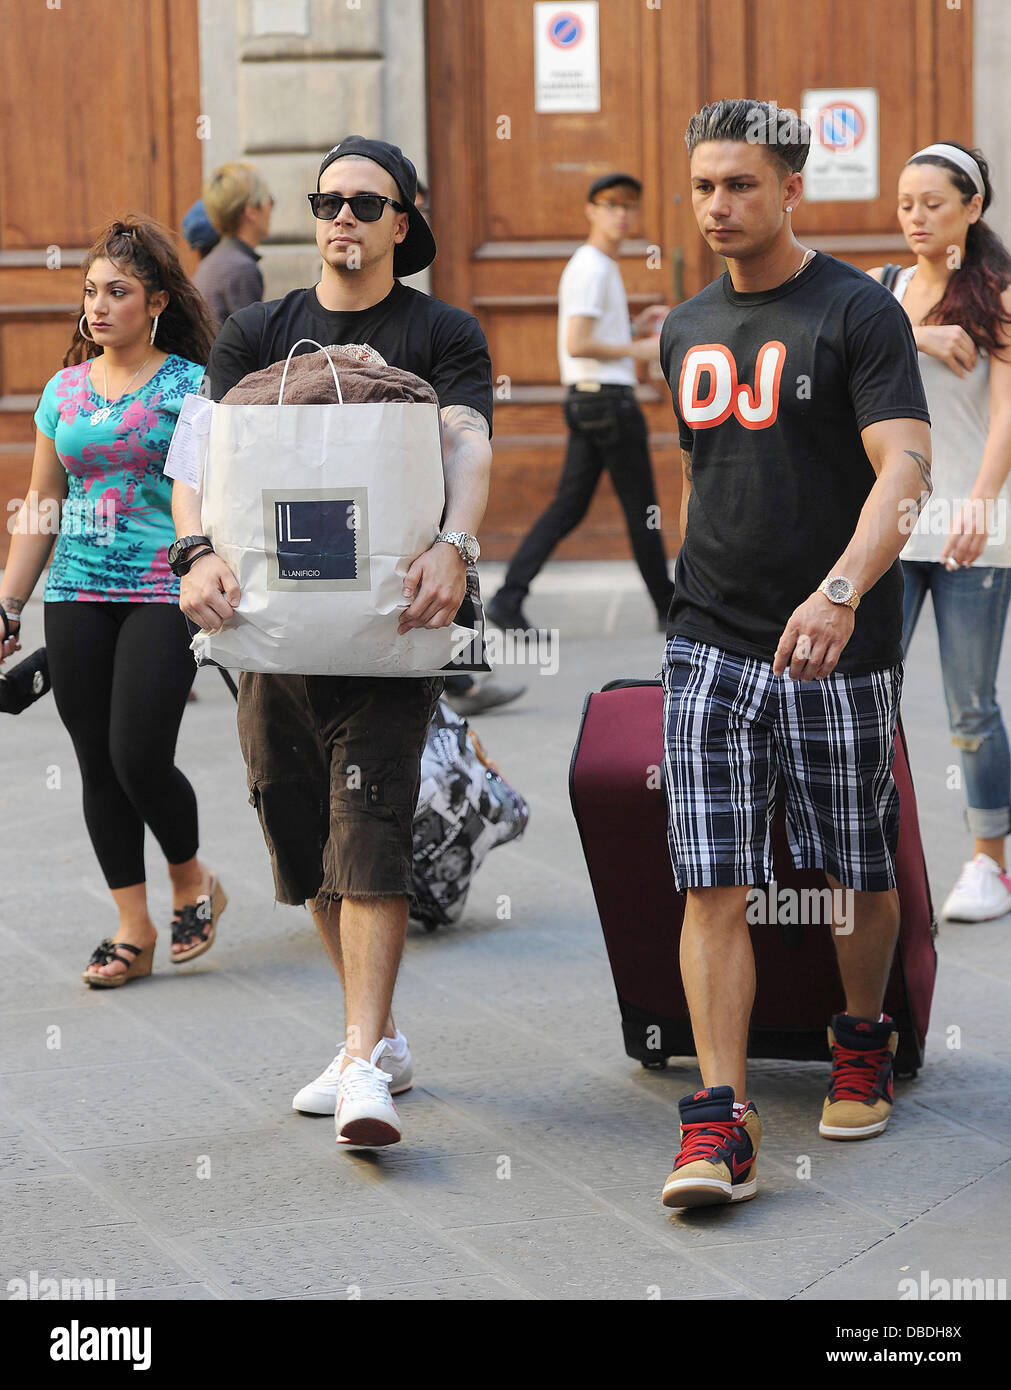 Jenni 'JWoww' Farley, Deena Nicole Cortese, Paul 'Pauly D' DelVecchio and Vinny Guadagnino Take their dirty clothes to the laundry, before walking back to the Jersey Shore house. Florence, Italy - 24.05.11 Stock Photo